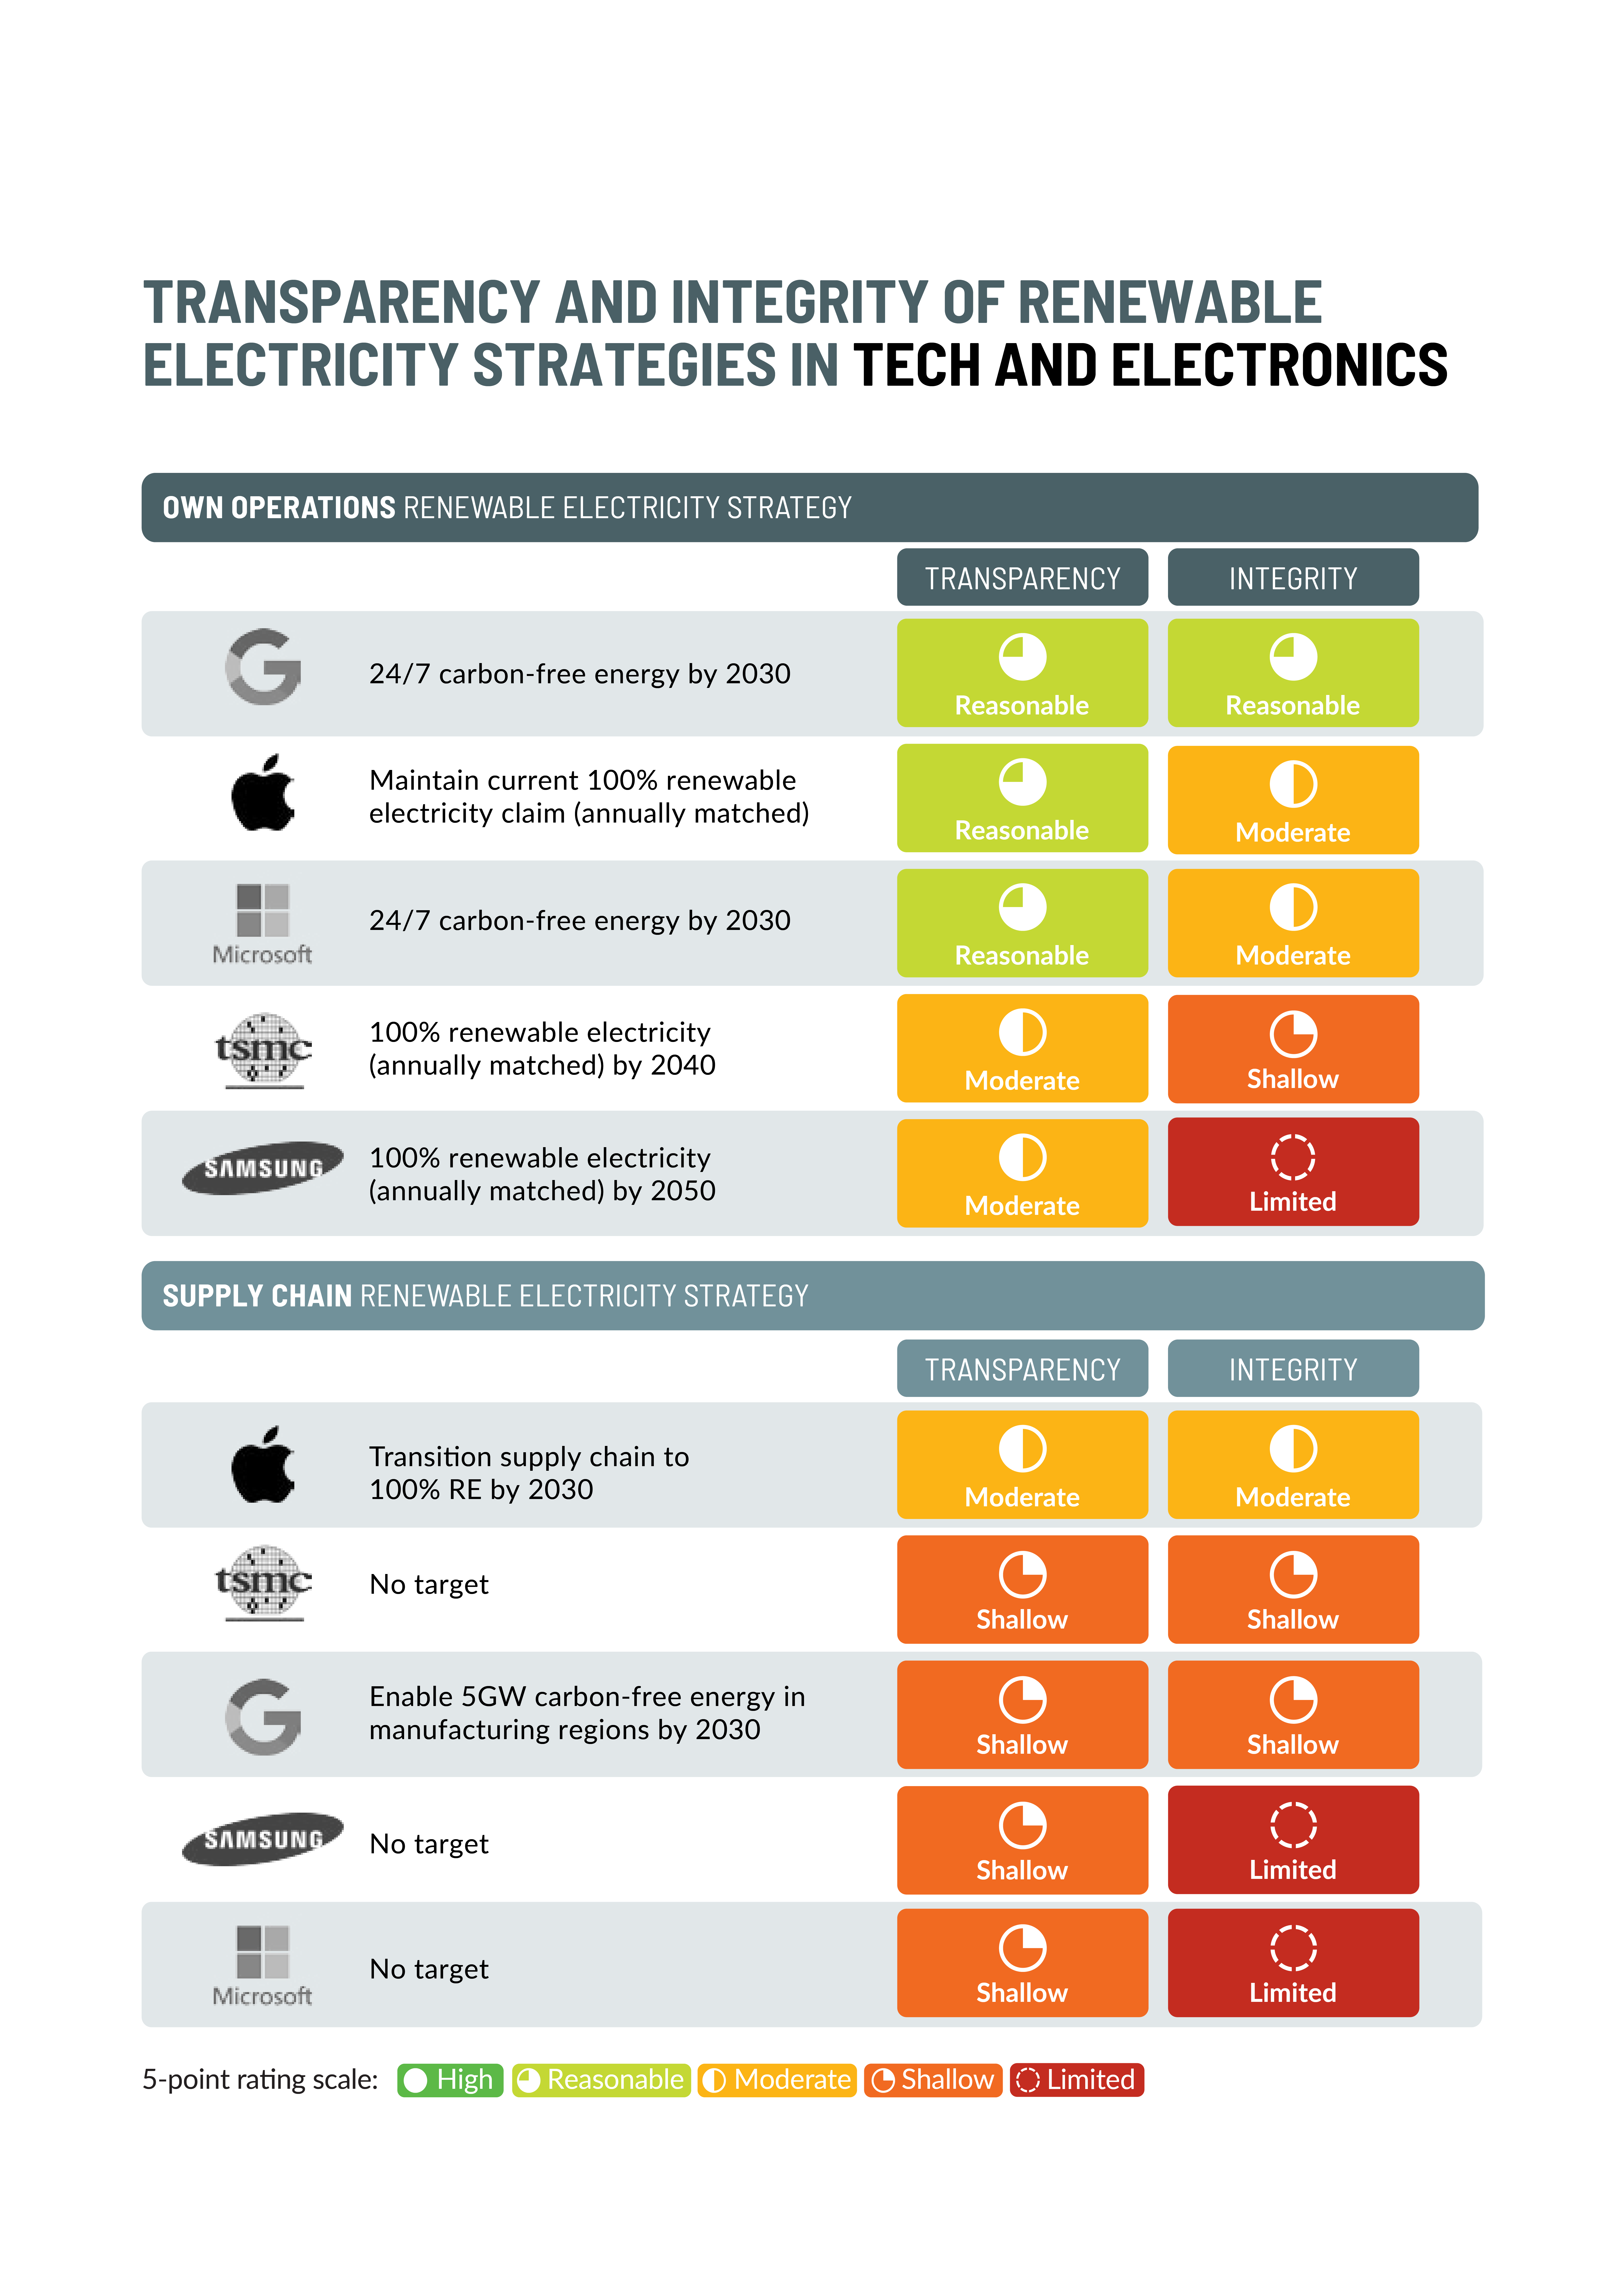 Table showing each tech companies' renewable electricity strategies and respective score on transparency and integrity